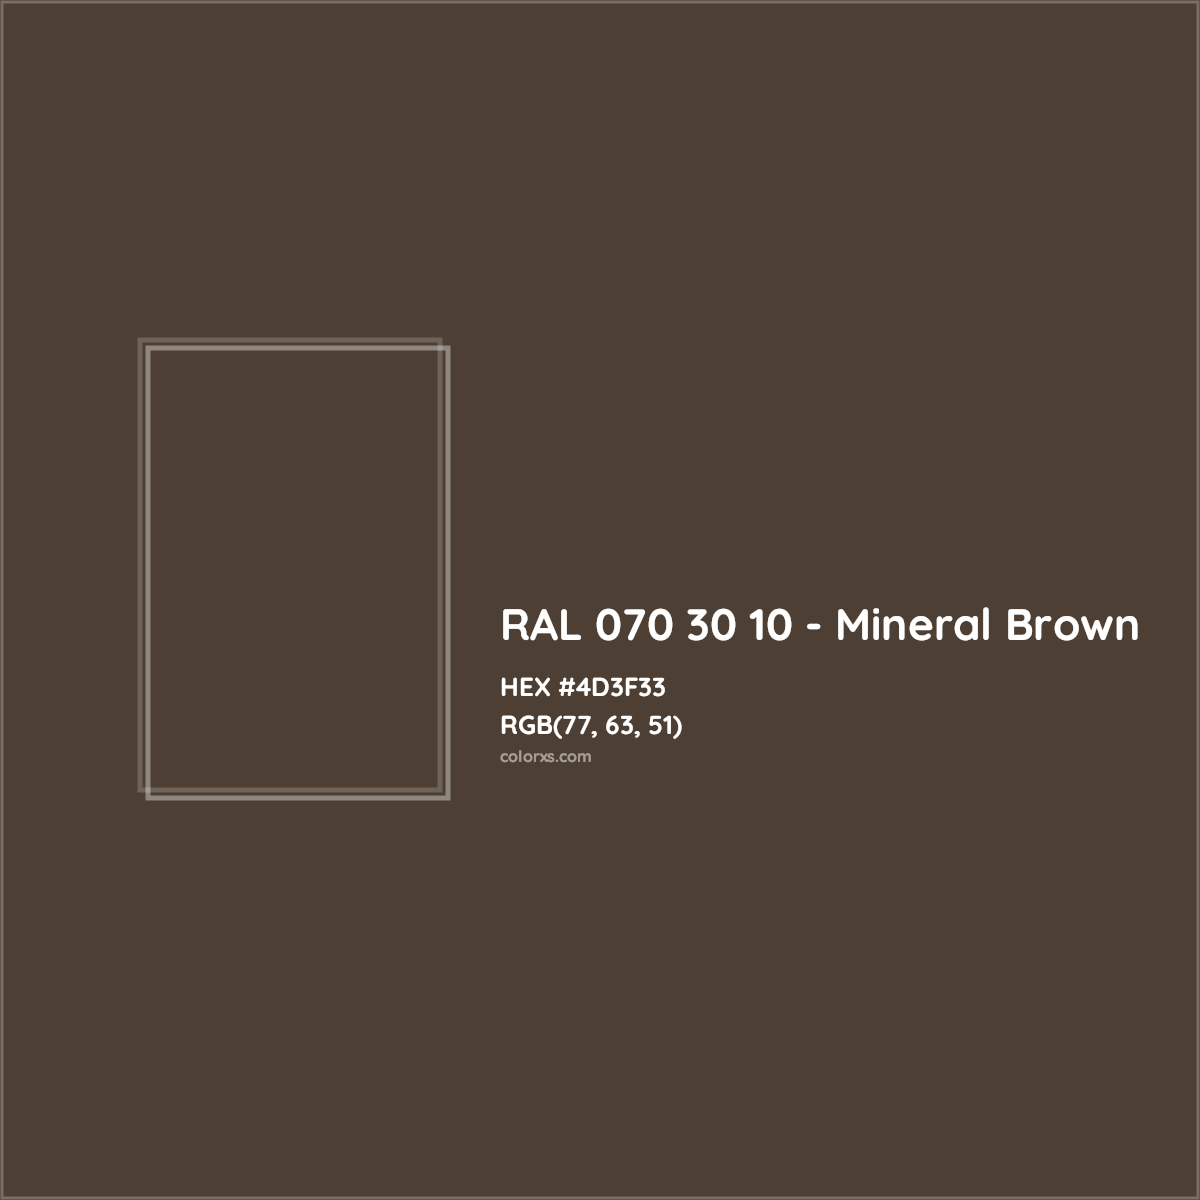 HEX #4D3F33 RAL 070 30 10 - Mineral Brown CMS RAL Design - Color Code